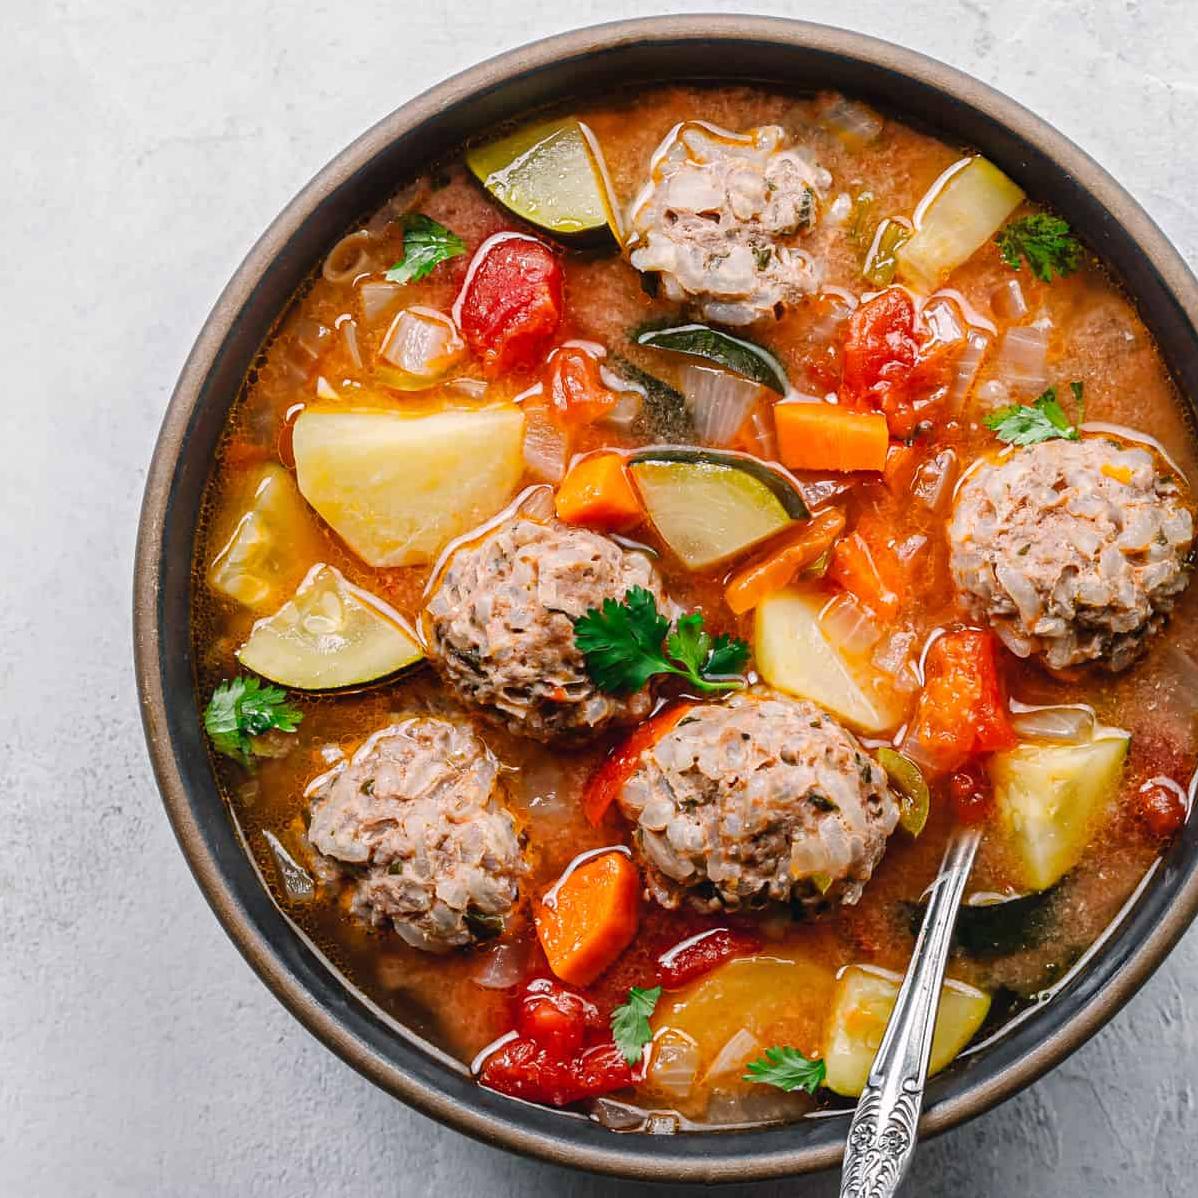  A hearty and comforting bowl of Sopa De Albondigas.